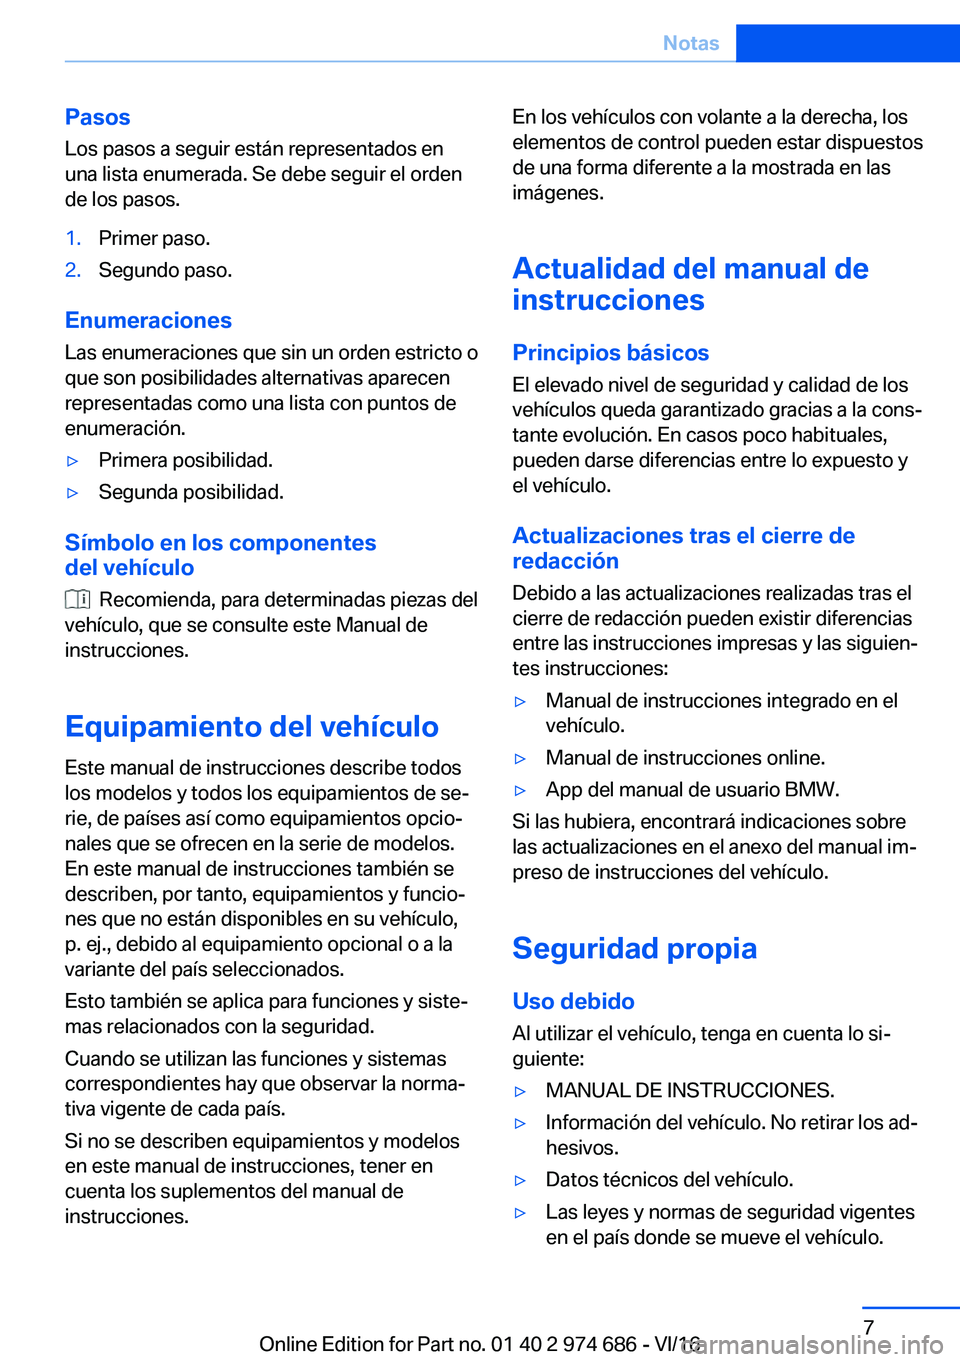 BMW M2 2017  Manuales de Empleo (in Spanish) �P�a�s�o�s
�L�o�s� �p�a�s�o�s� �a� �s�e�g�u�i�r� �e�s�t�